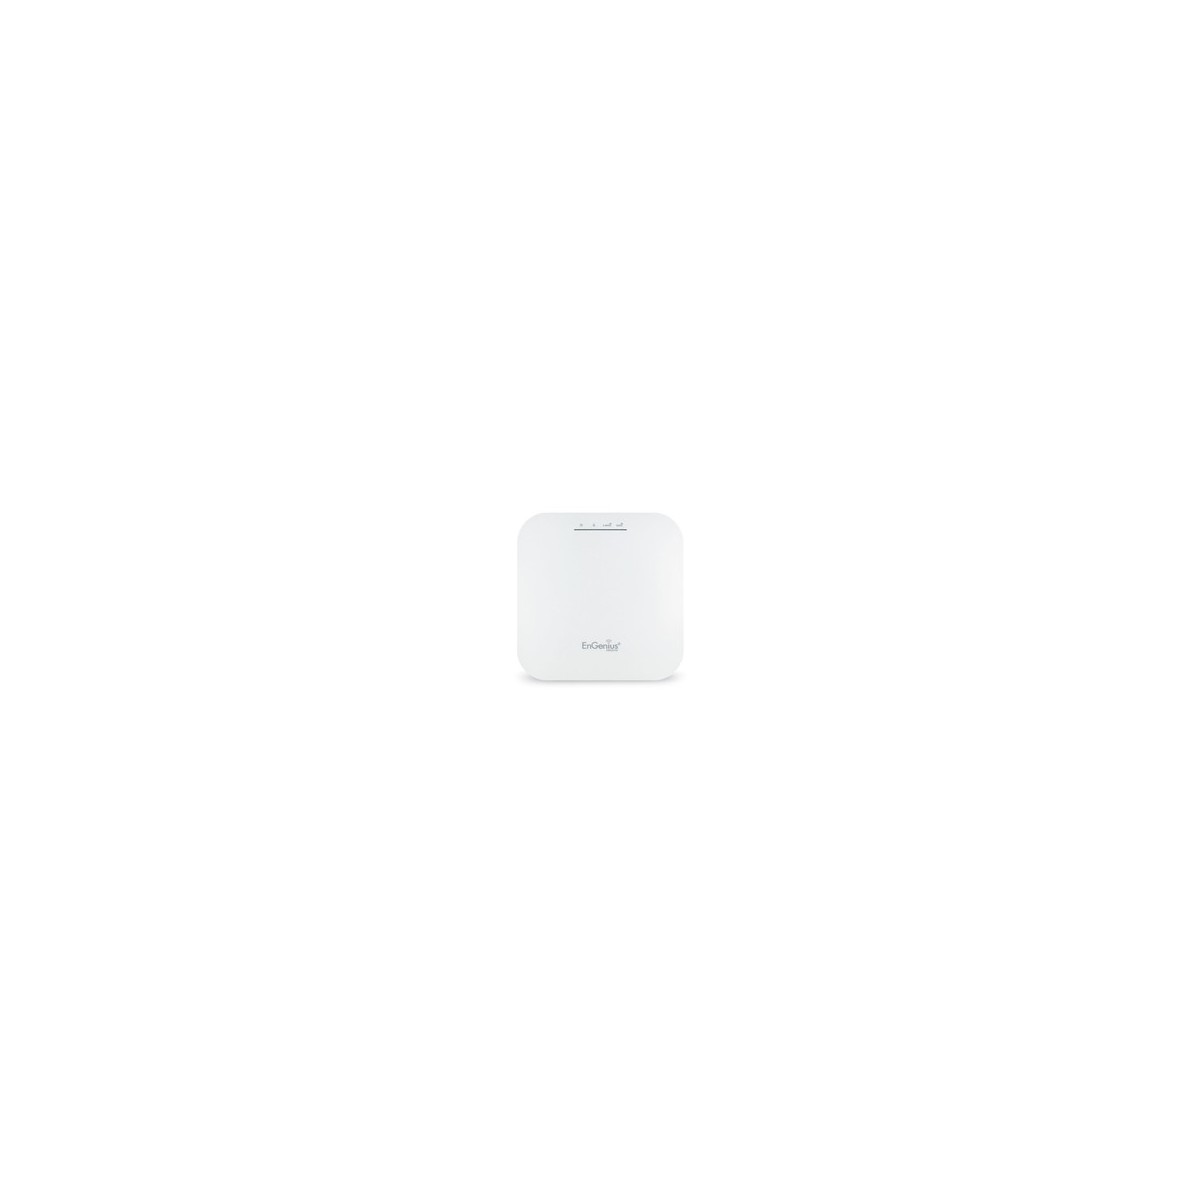 EnGenius EWS357AP WiFi 6 Managed AP Indoor Dual Band 11ax 574+1200Mbps 2T2R GbE PoE.af 3dBi ia - 1200 Mbit-s - 10,100,1000 Mbit-